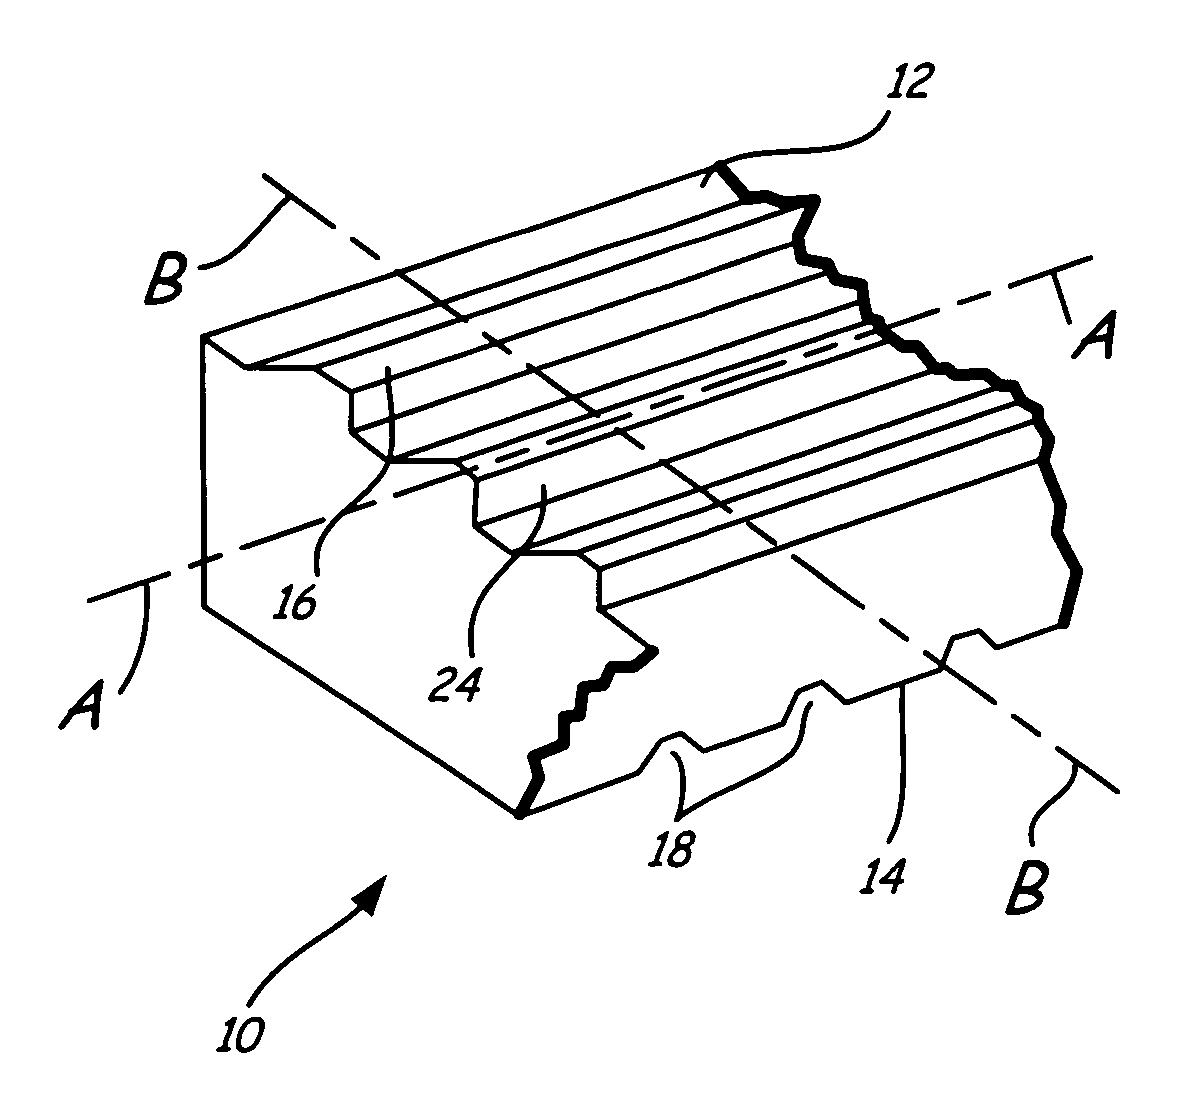 Bioimplant with nonuniformly configured protrusions on the load bearing surfaces thereof